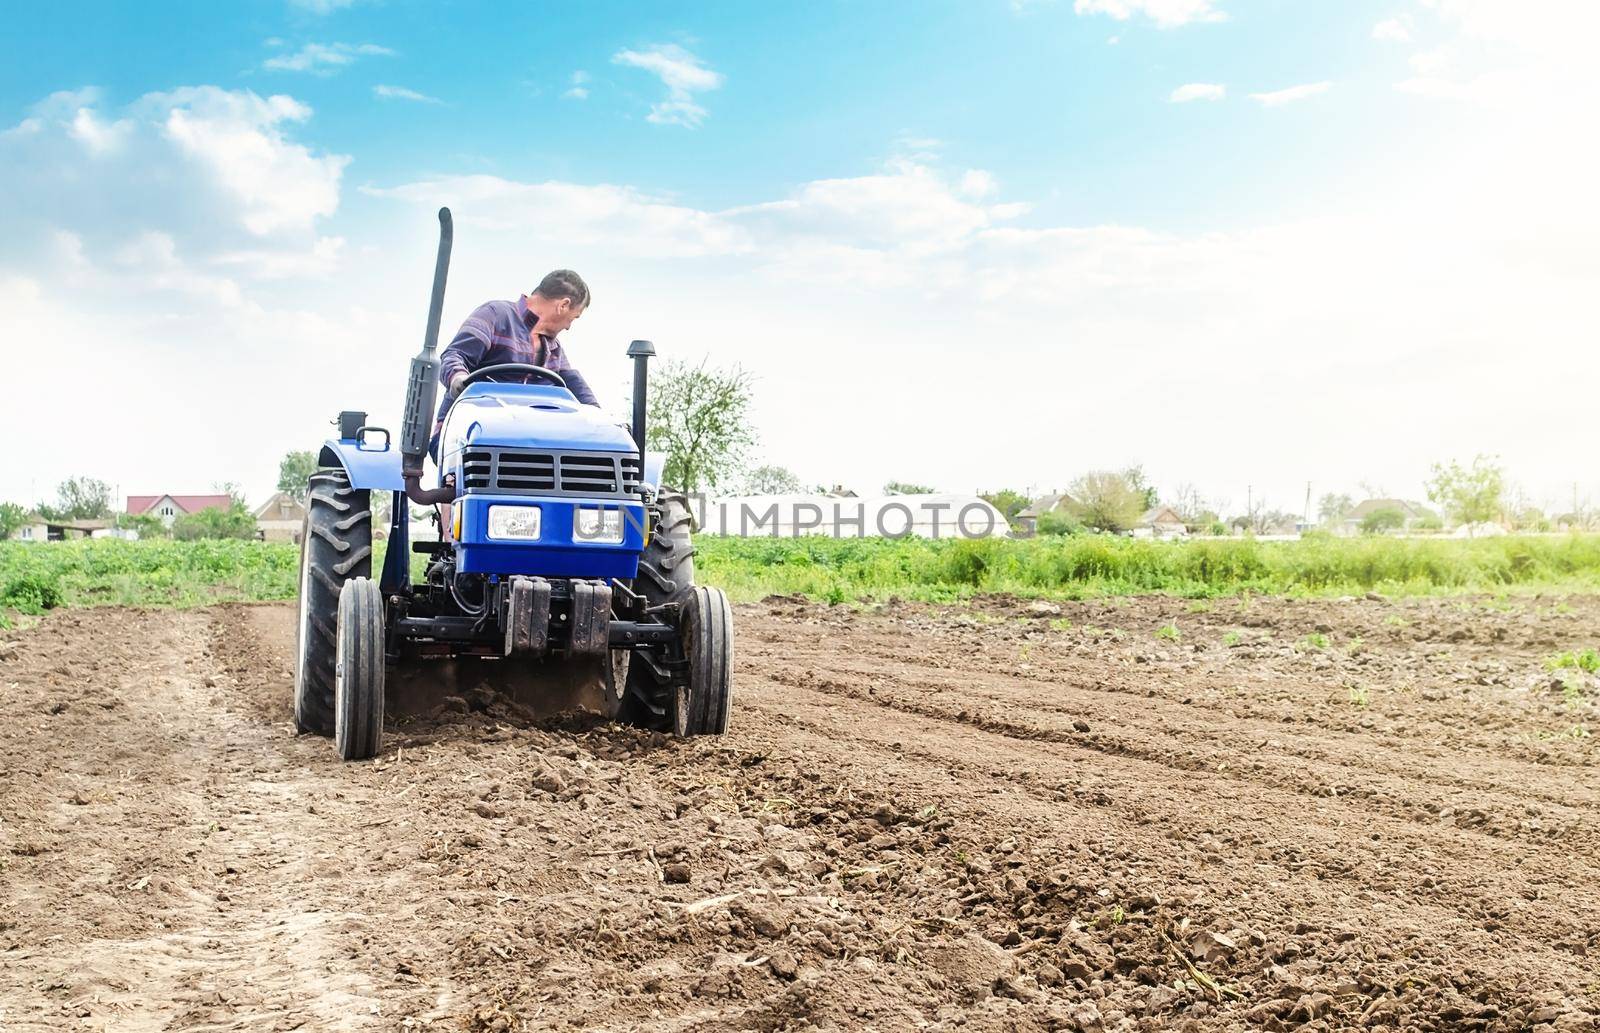 Farmer is processing soil on a tractor. Soil milling, crumbling mixing. Loosening surface, cultivating land for further planting. Agroindustry, farming. Agriculture, growing organic food vegetables by iLixe48